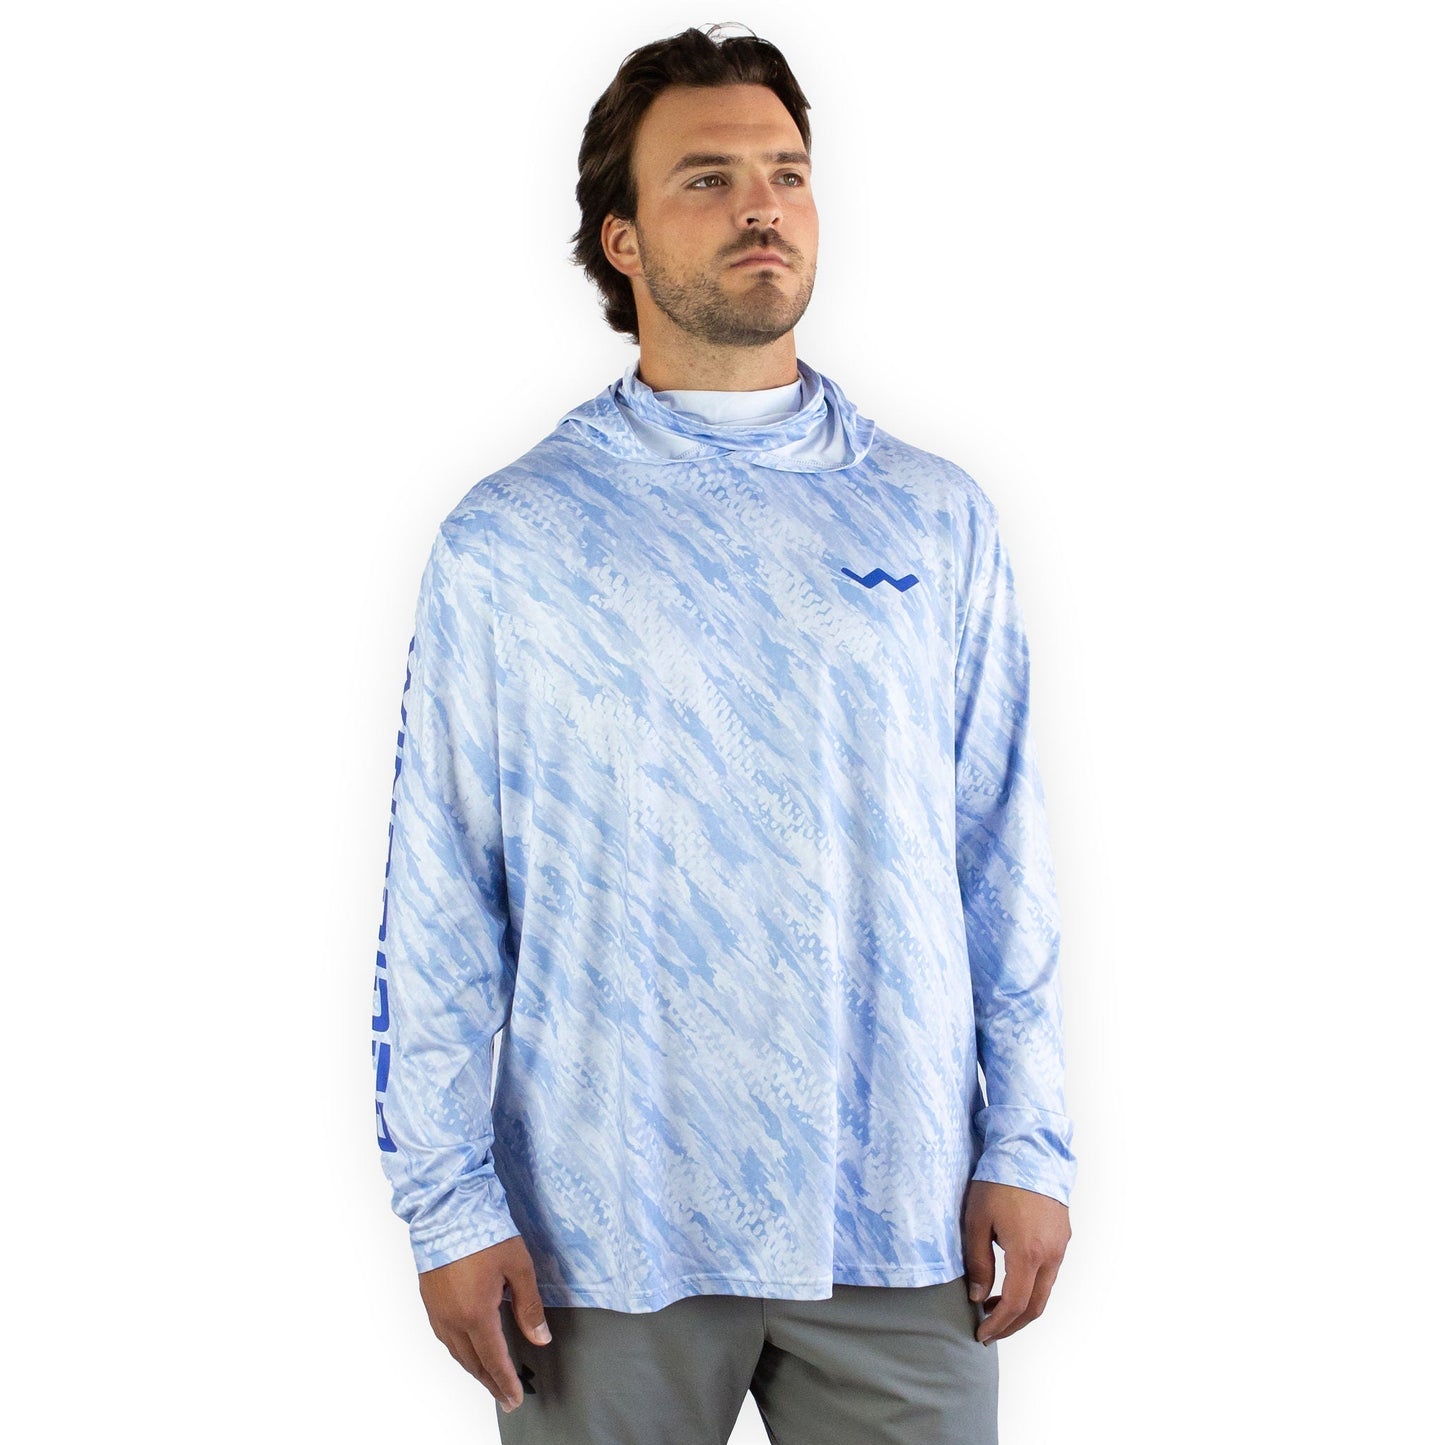 Fishing Shirt with Neck Gaiter in Blue